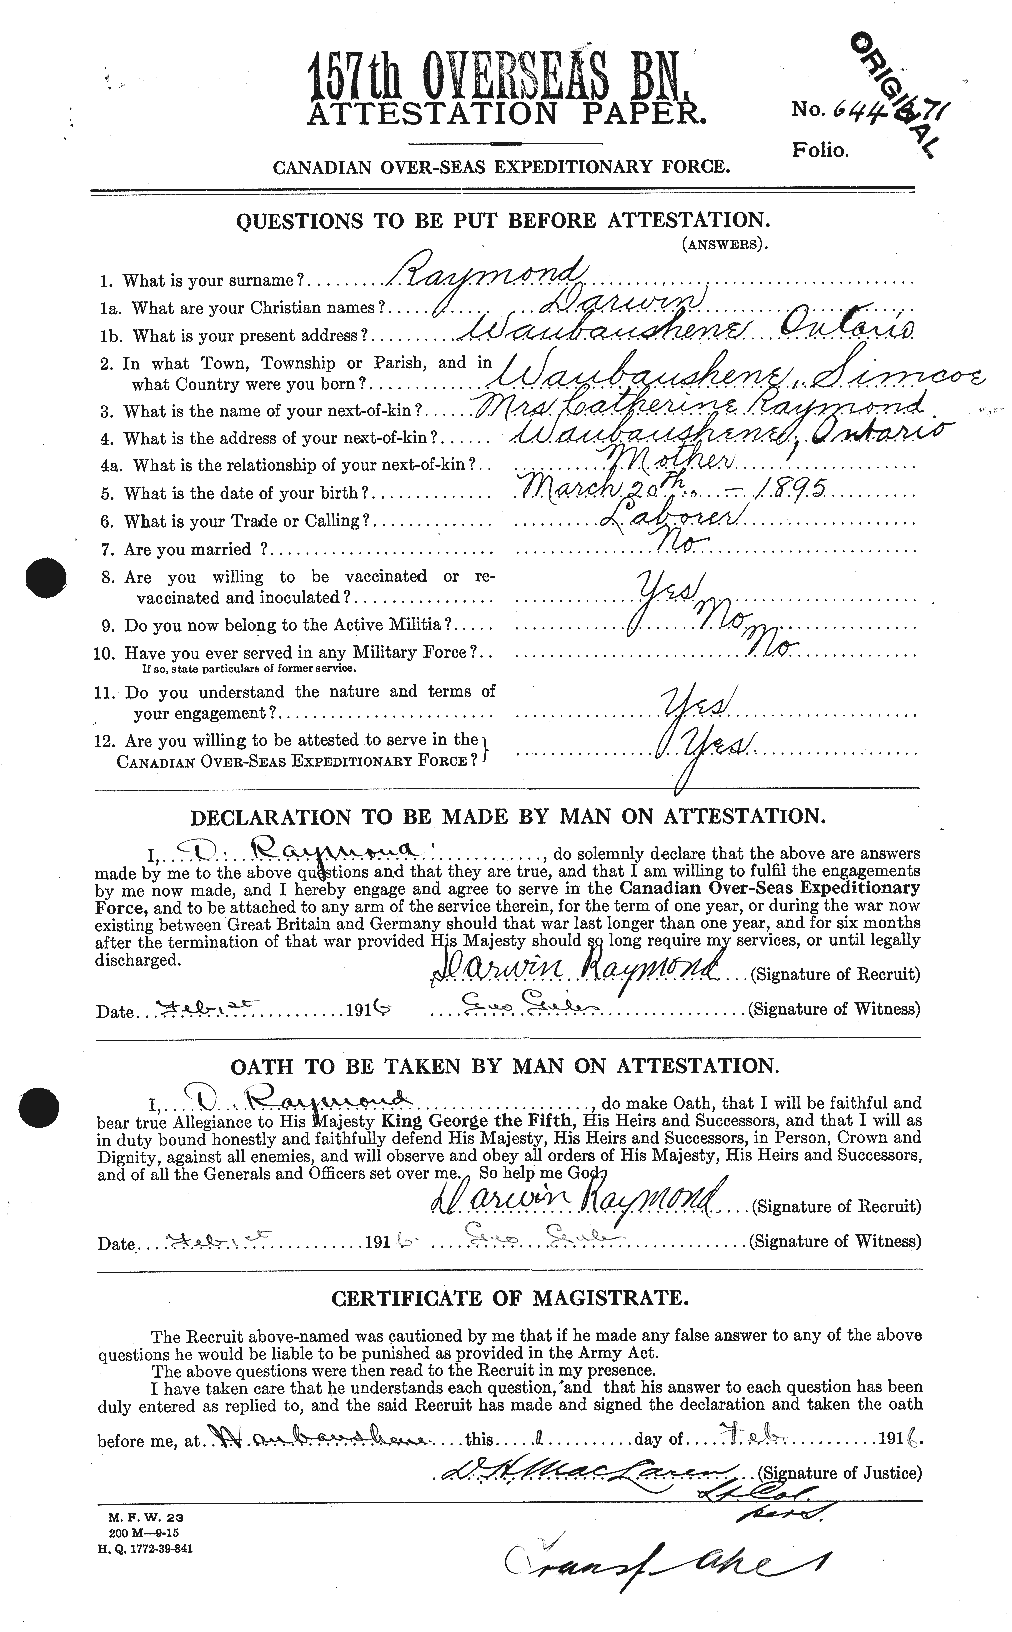 Personnel Records of the First World War - CEF 595289a